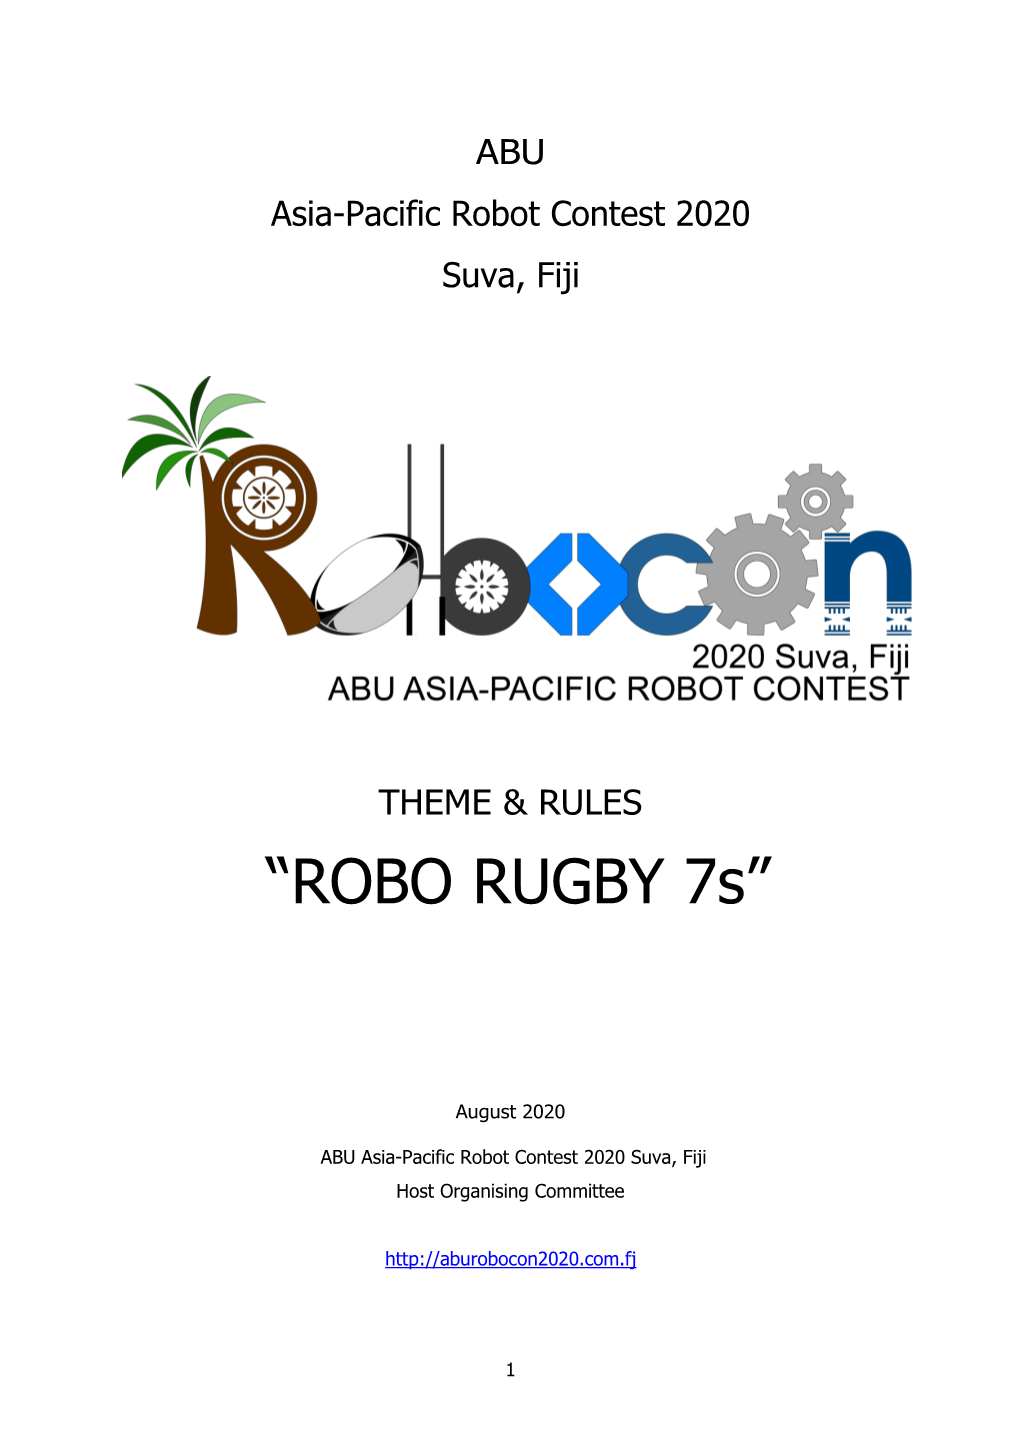 “ROBO RUGBY 7S”